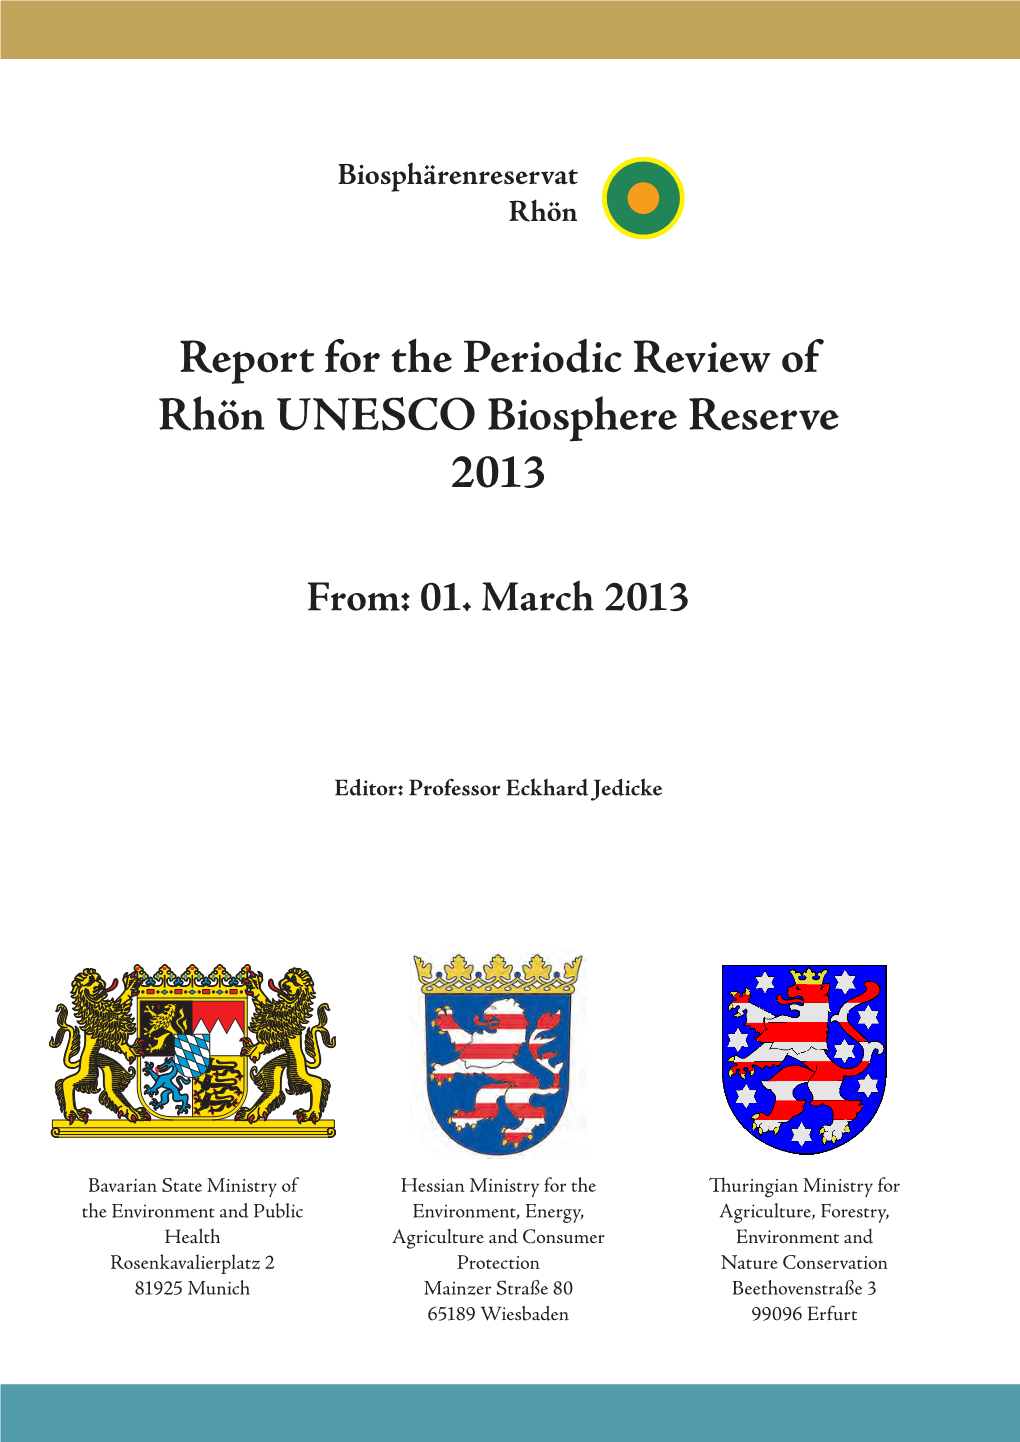 Report for the Periodic Review of Rhön UNESCO Biosphere Reserve 2013